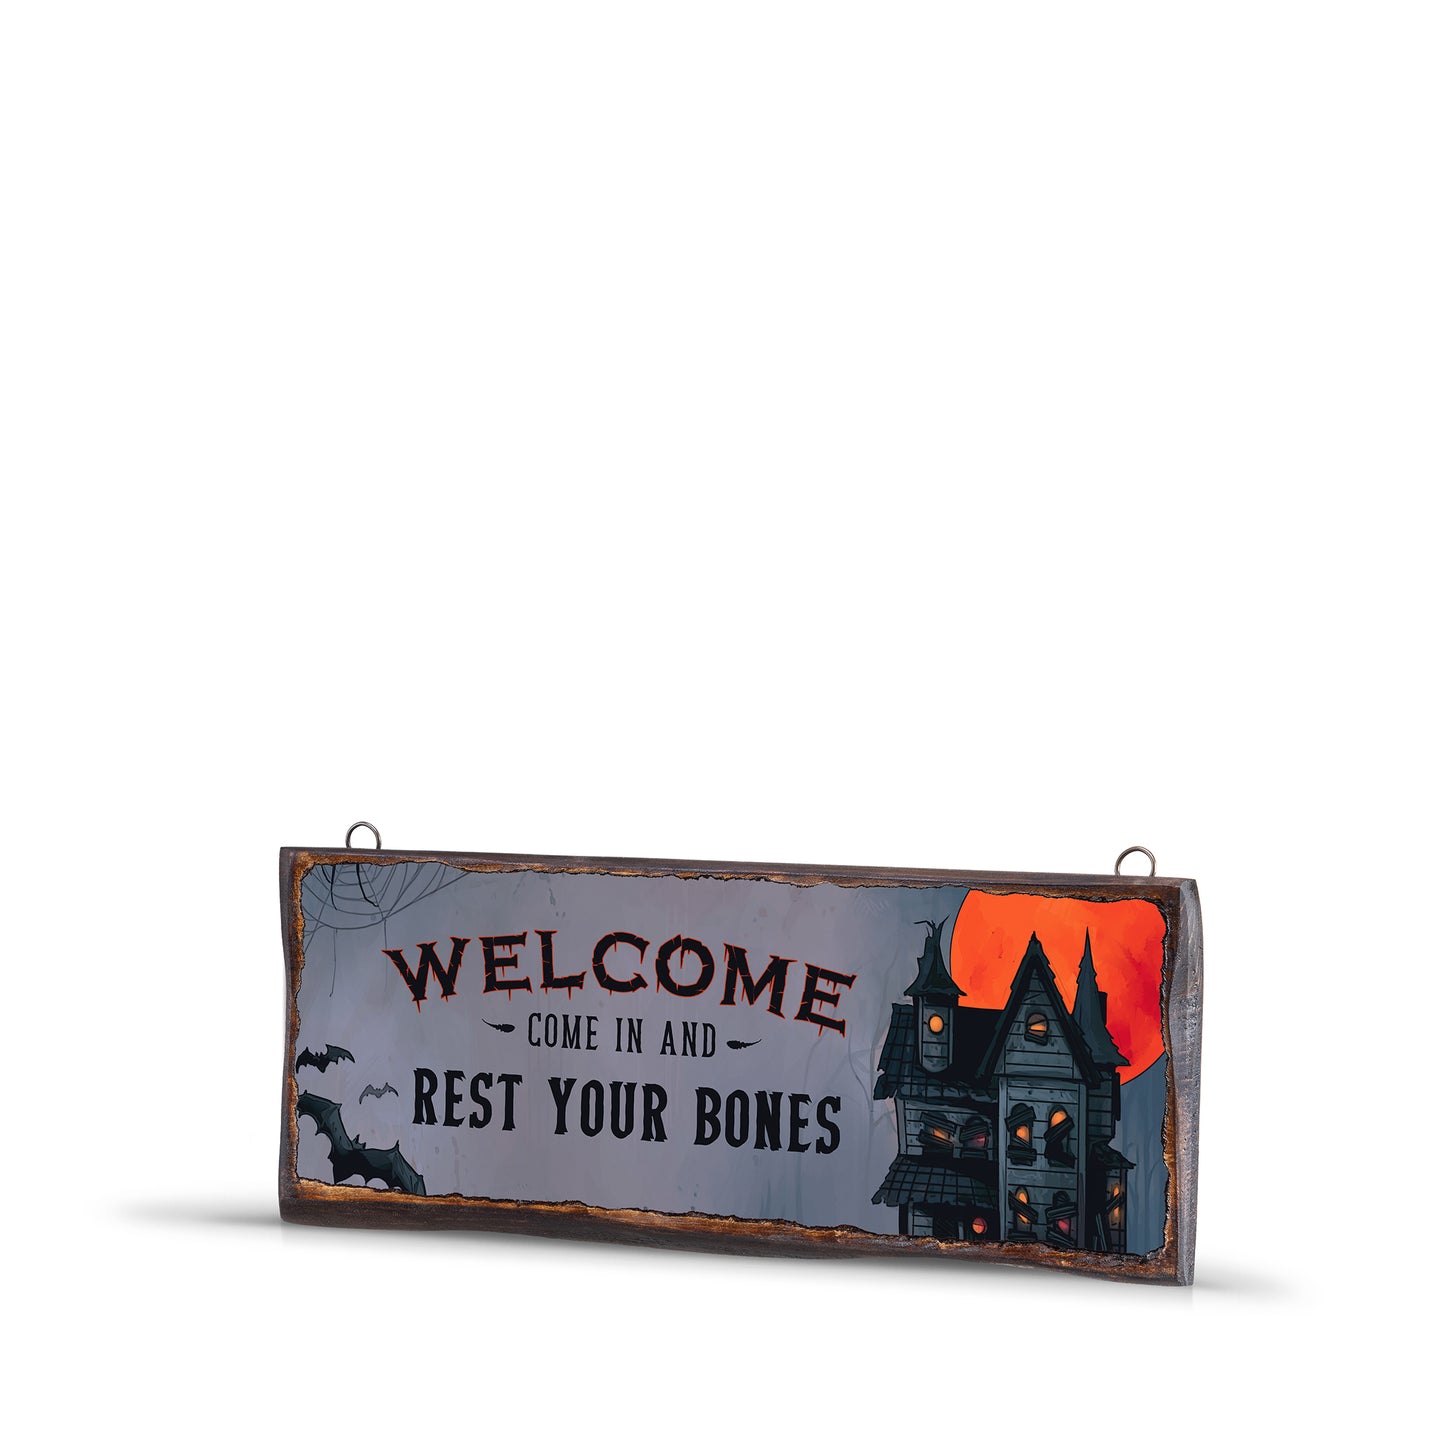 WELCOME COME IN AND REST YOUR BONES WOODEN SIGN - WS023